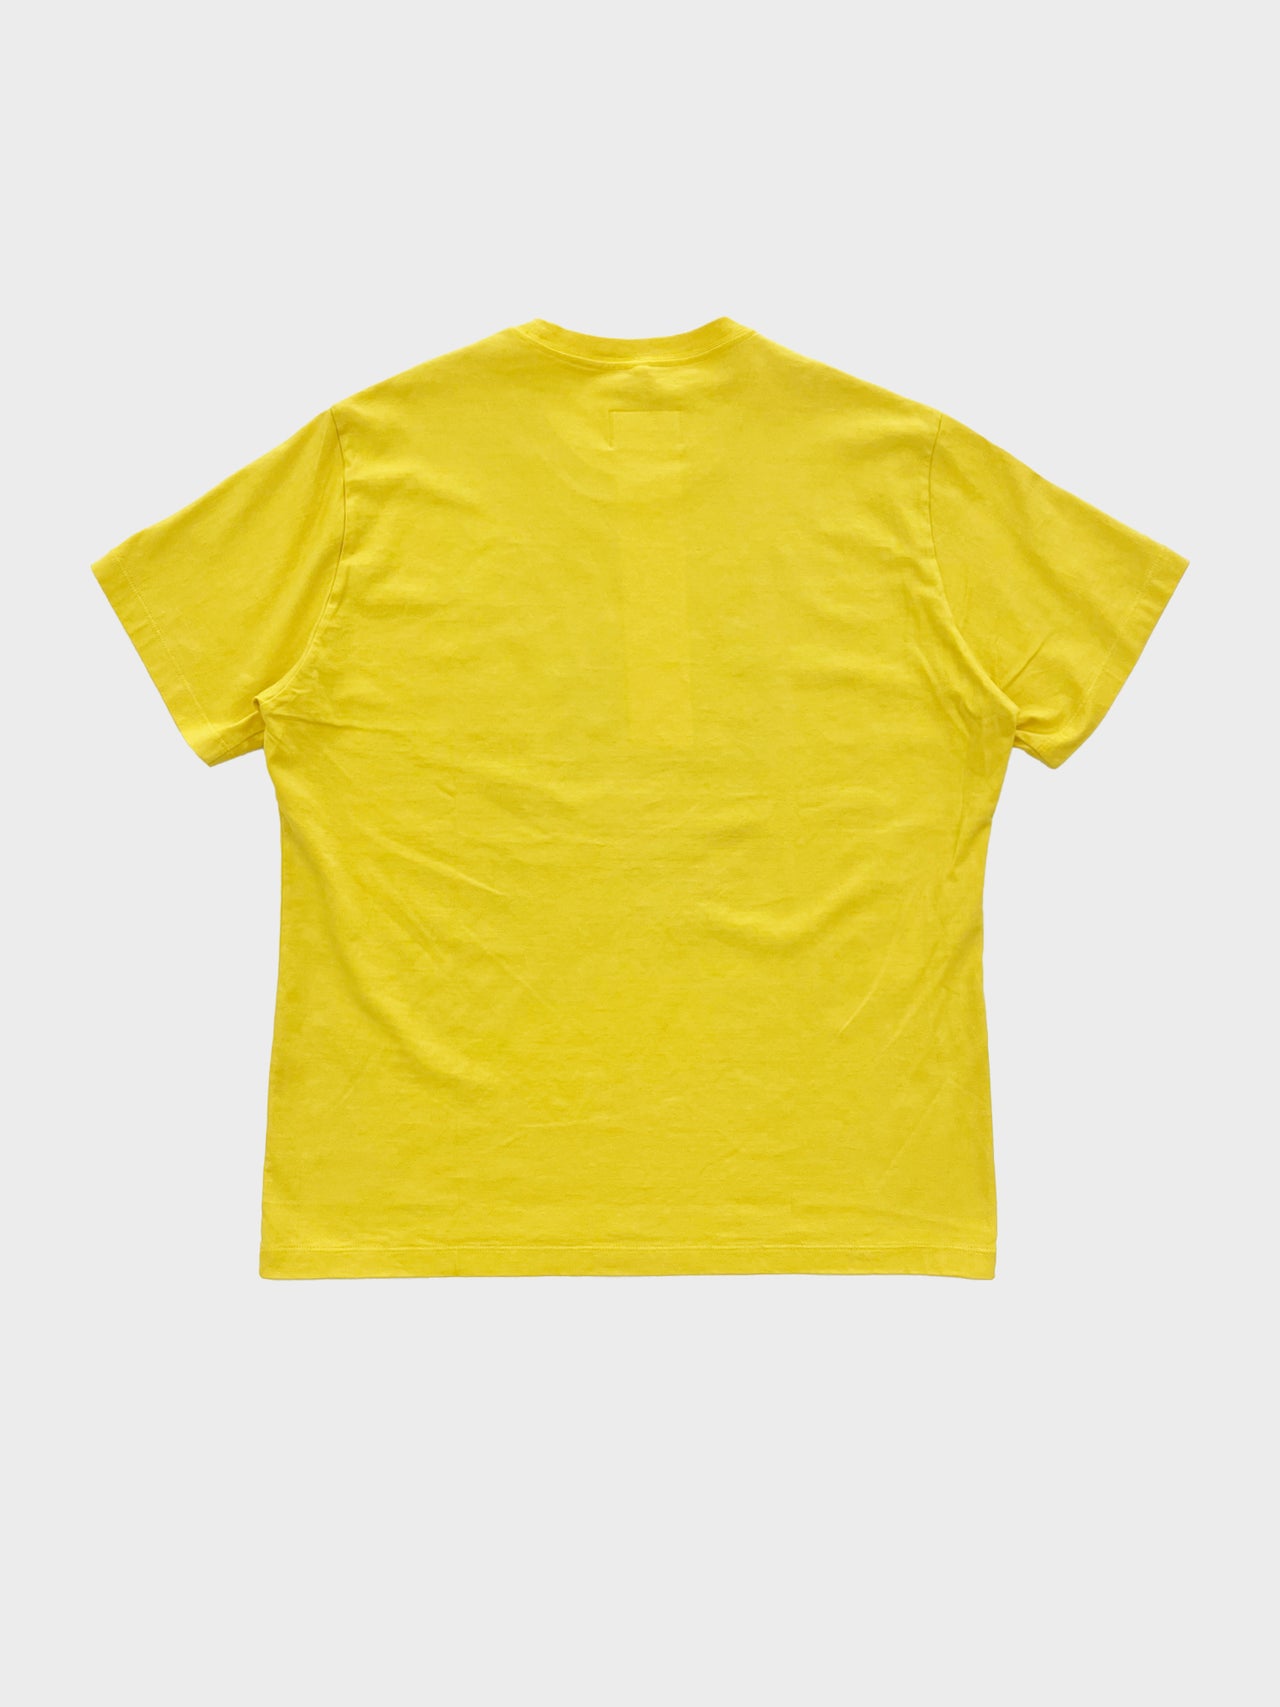 doublet / AI-GENERATED "DOUBLET" LOGO T-SHIRT (YELLOW)